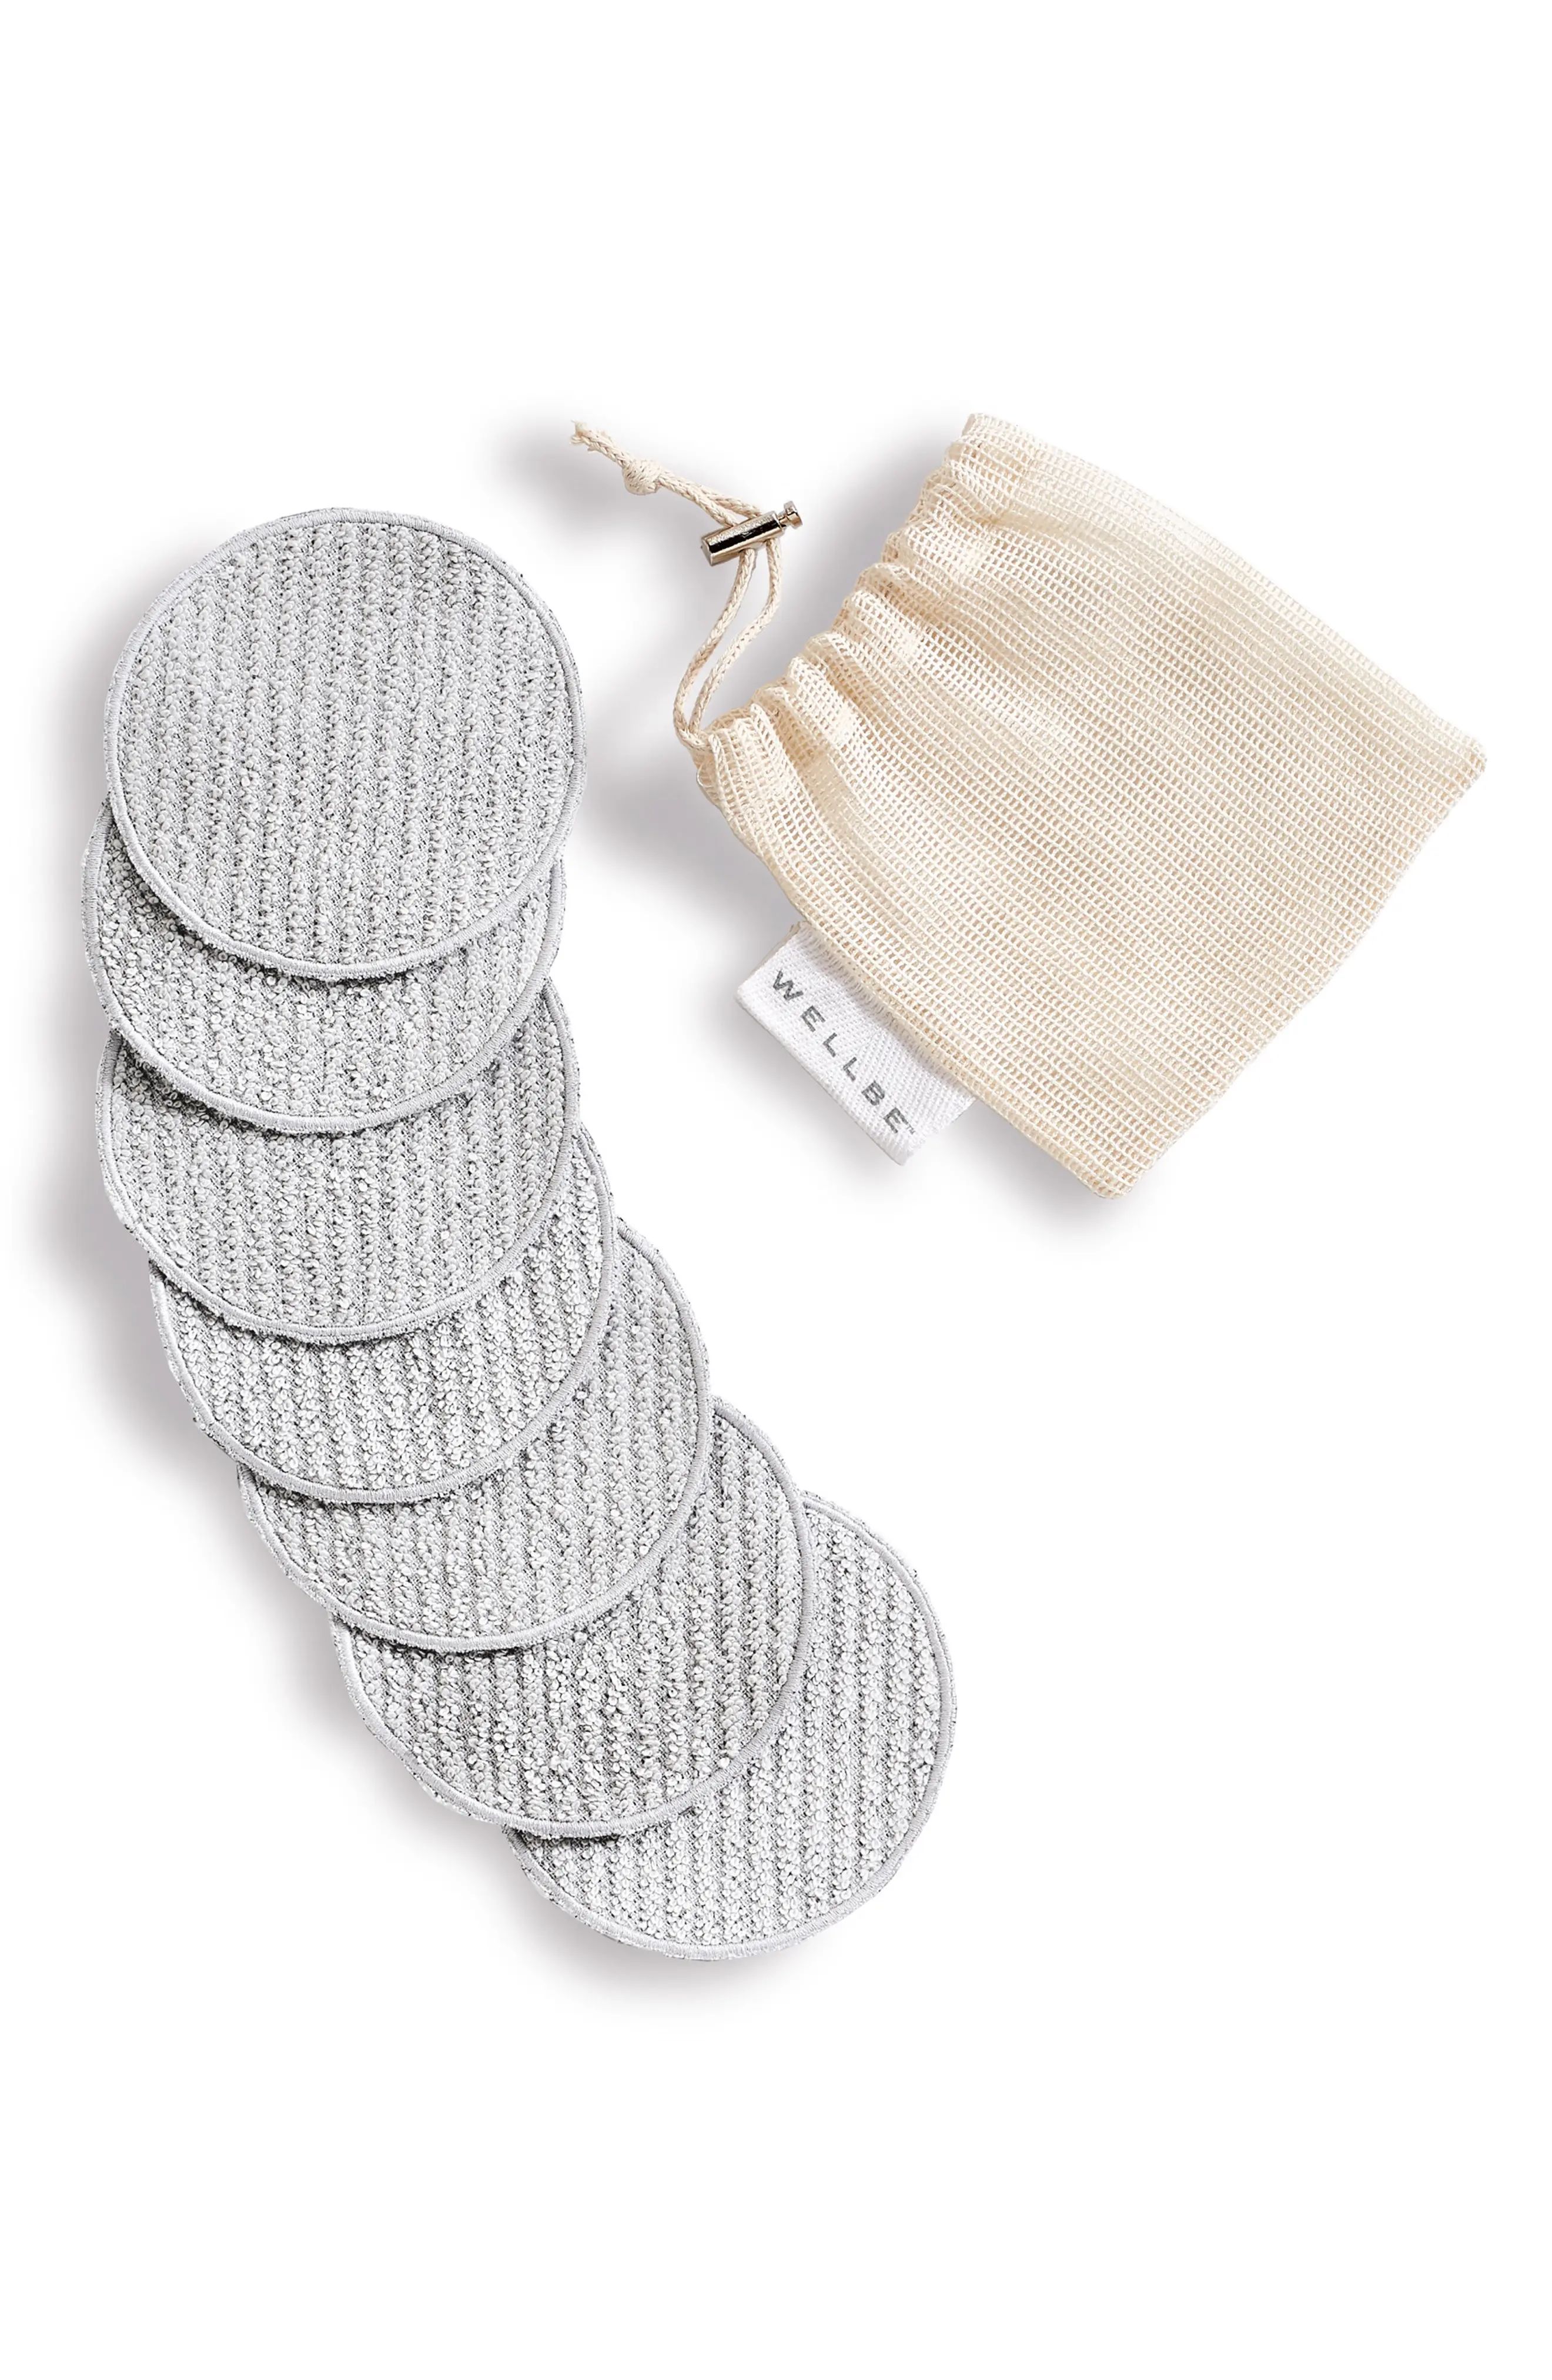 WellBe Set of 7 Washable Cosmetic Cloths in White at Nordstrom | Nordstrom